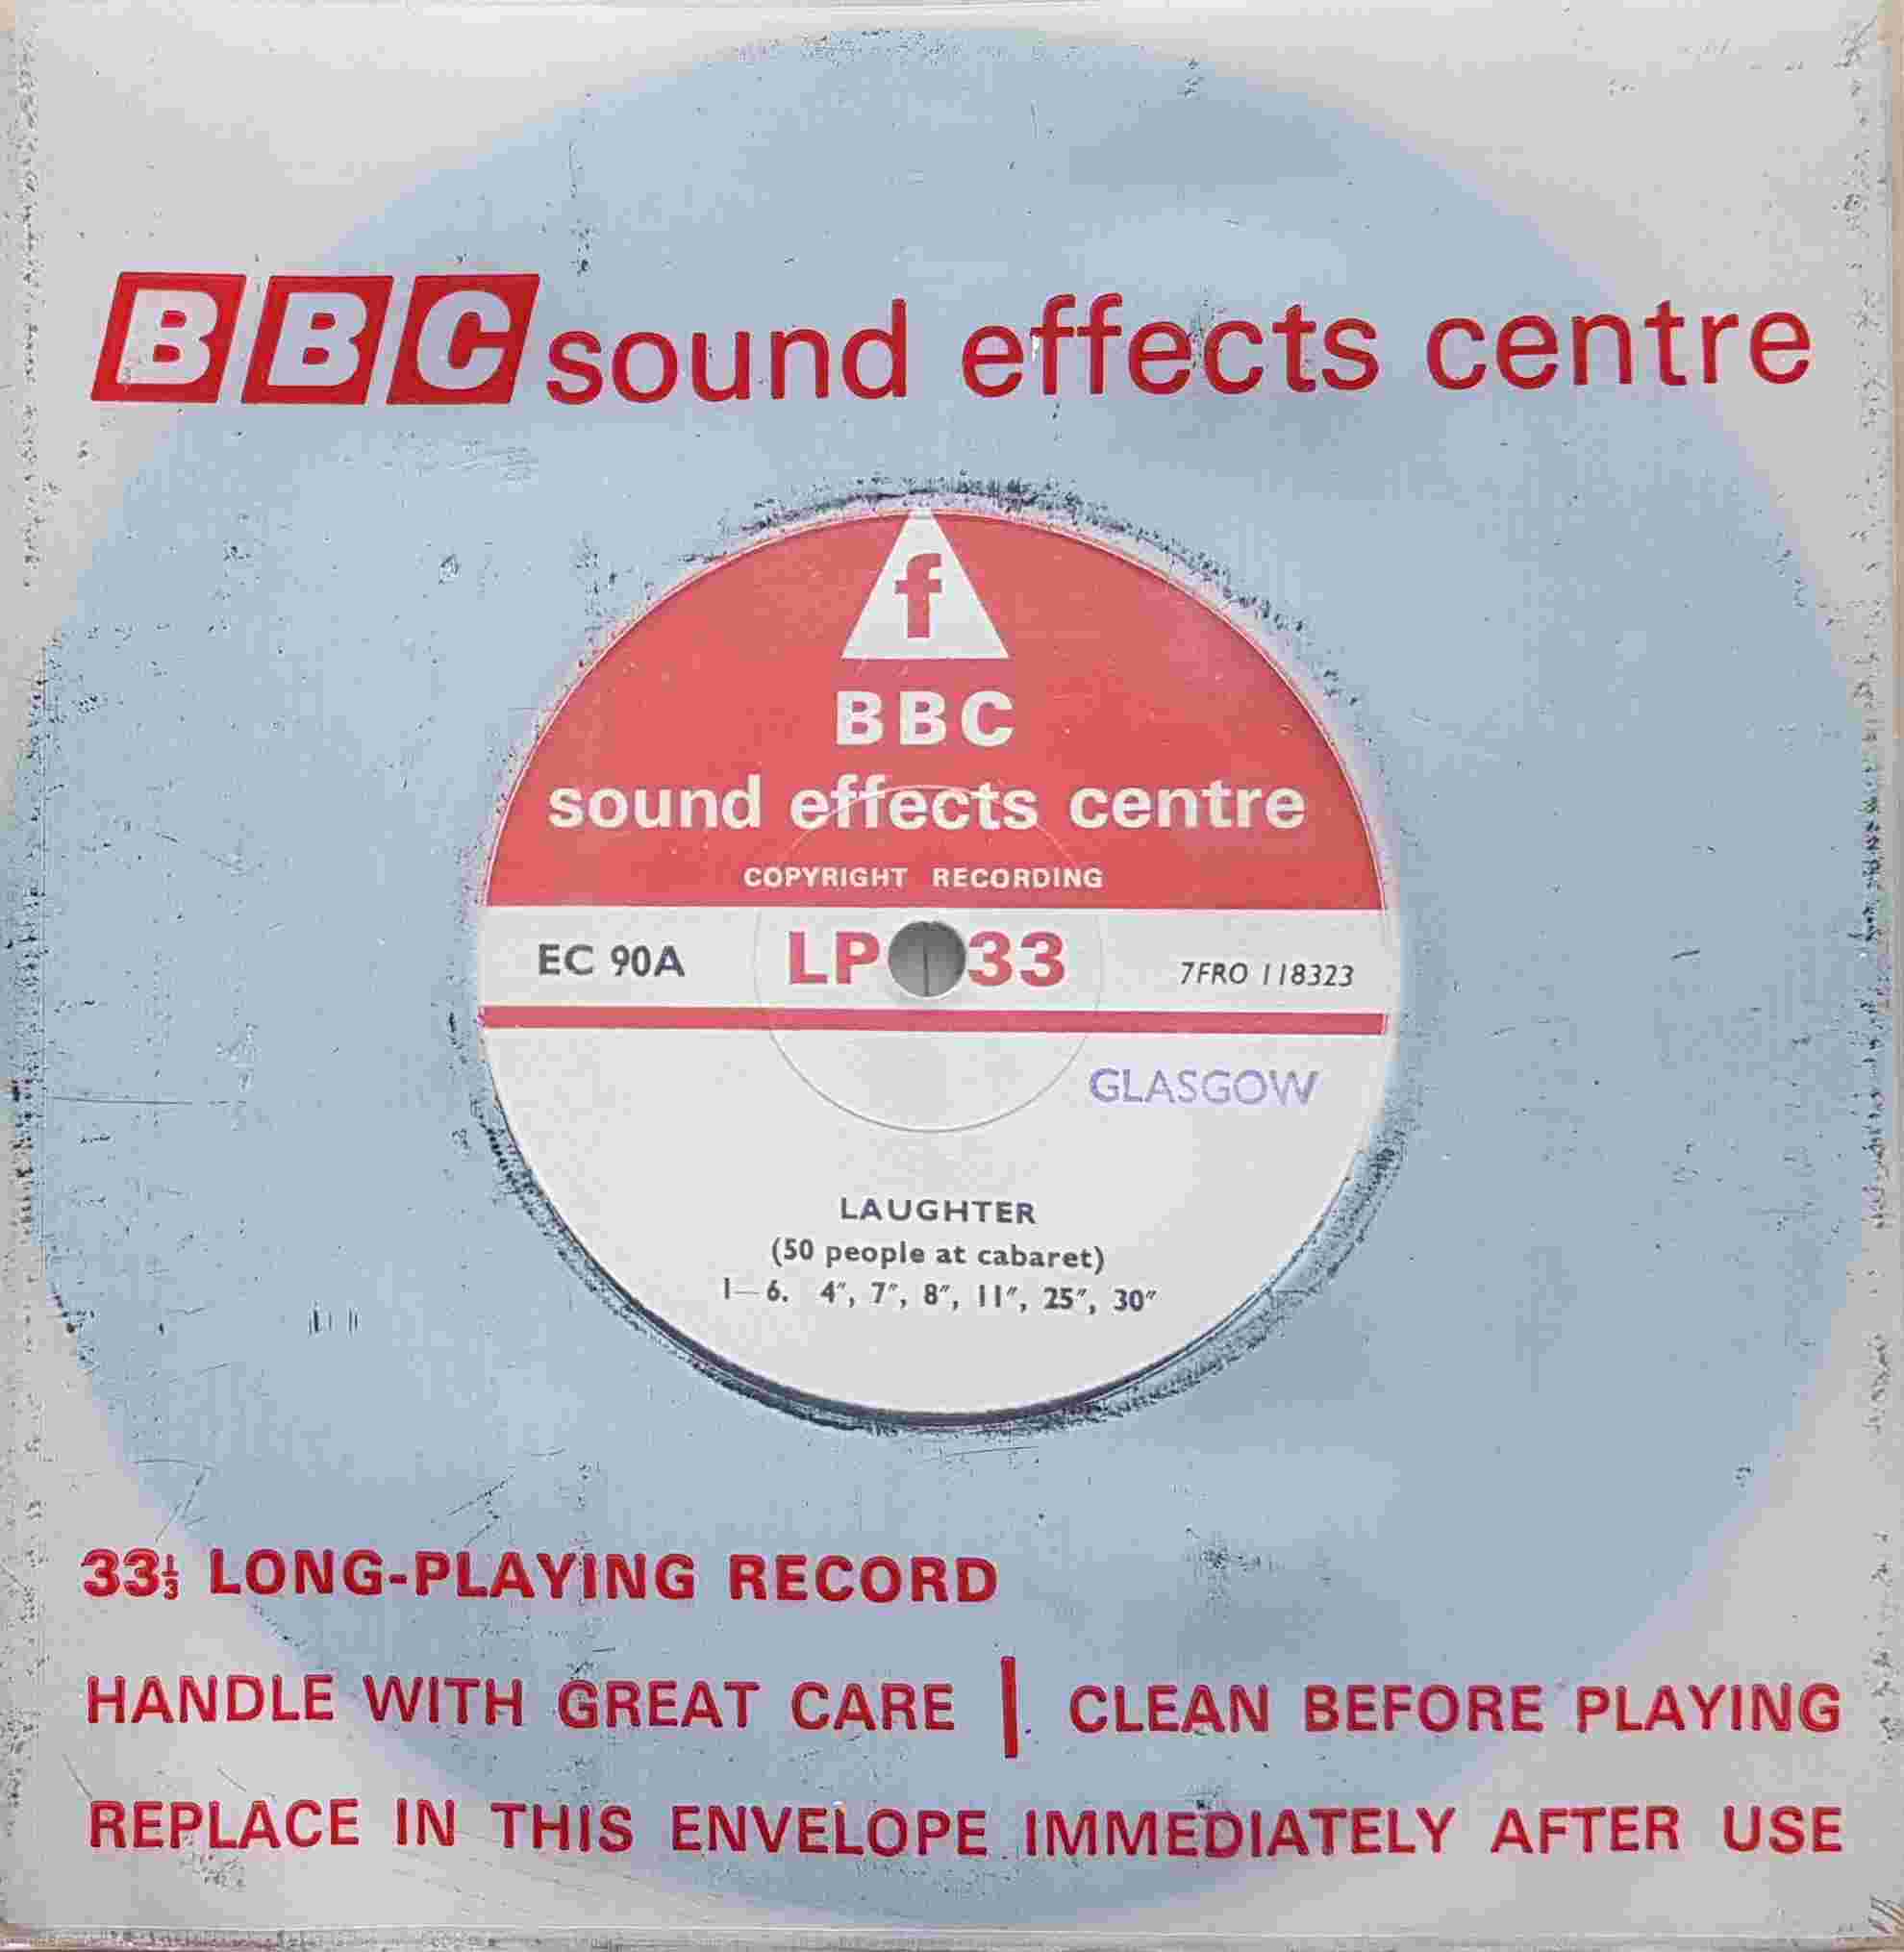 Picture of EC 90A Laughter by artist Not registered from the BBC records and Tapes library